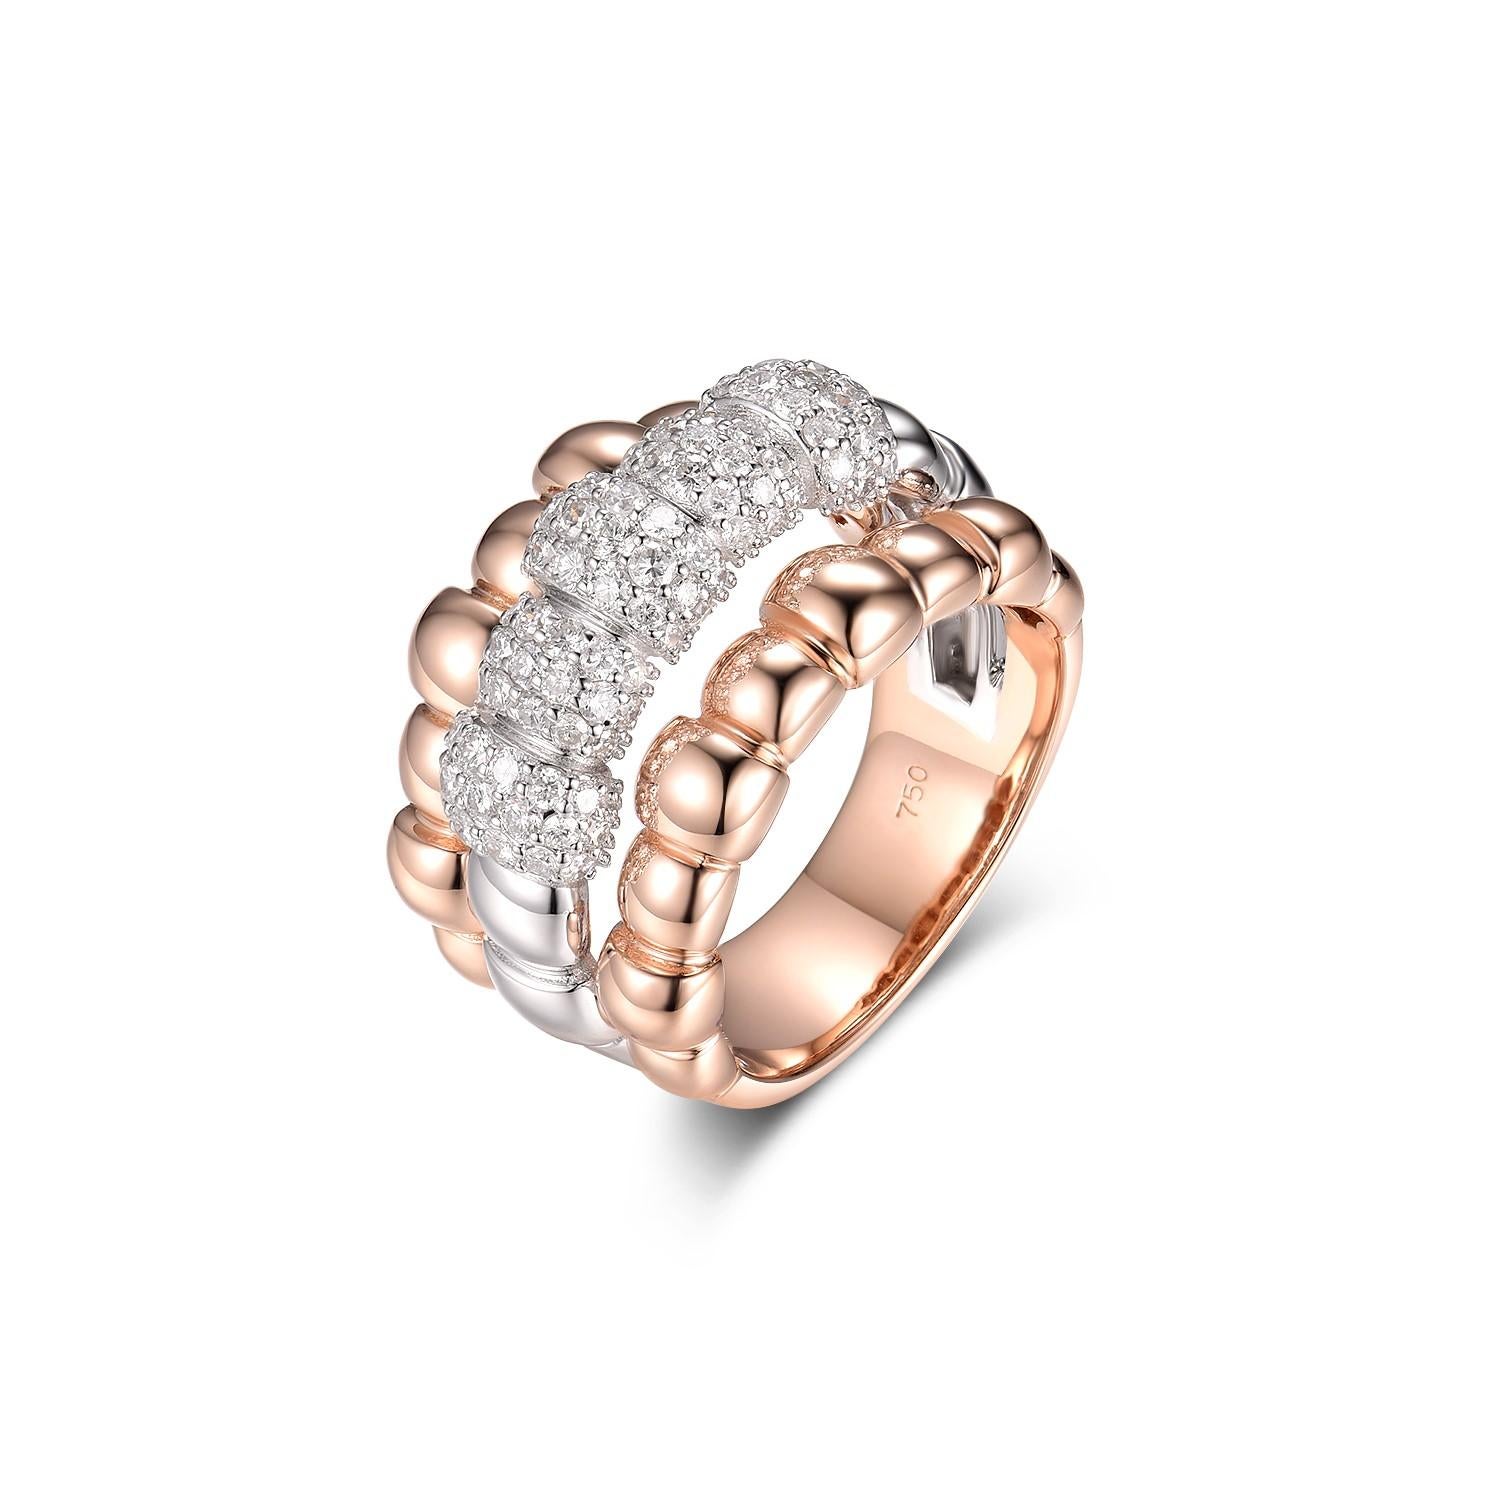 This luxurious ring is a symphony of style and sophistication, expertly crafted with alternating bands of rich 18K rose gold and gleaming 18K white gold. Encrusted with 1.05 carats of pave-set diamonds, the ring exudes a radiant sparkle from every